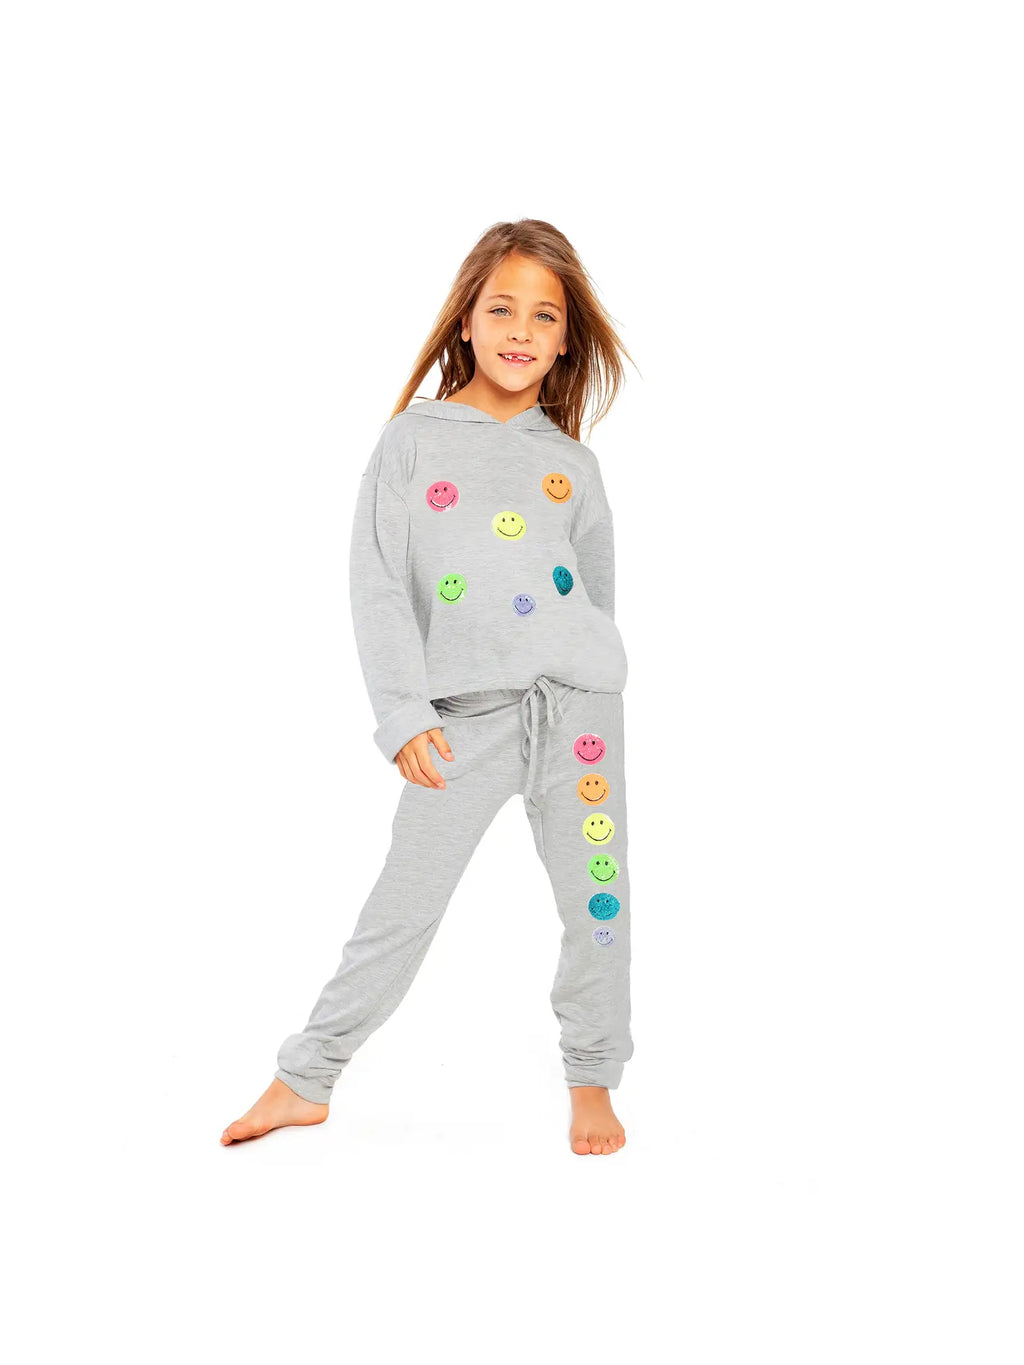 Butter Fleece Sweatpants With Smiley Patches- Girls